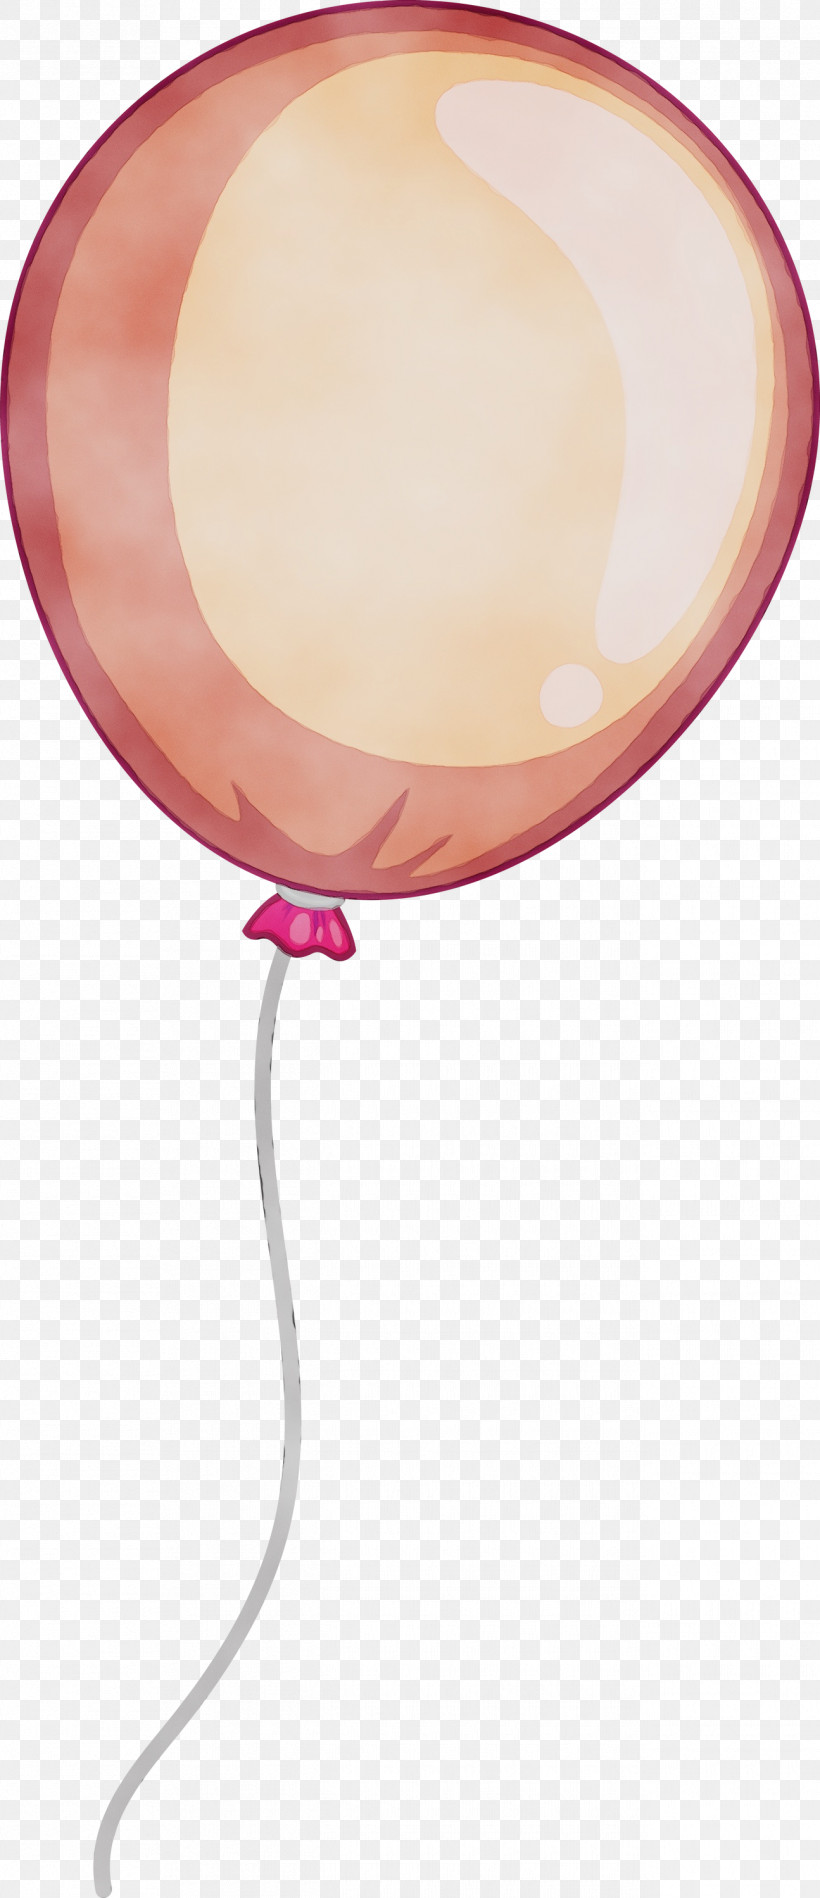 Lighting Accessory Pink M Balloon Lamp Lighting, PNG, 1295x2999px, Balloon, Lamp, Lighting, Lighting Accessory, Paint Download Free